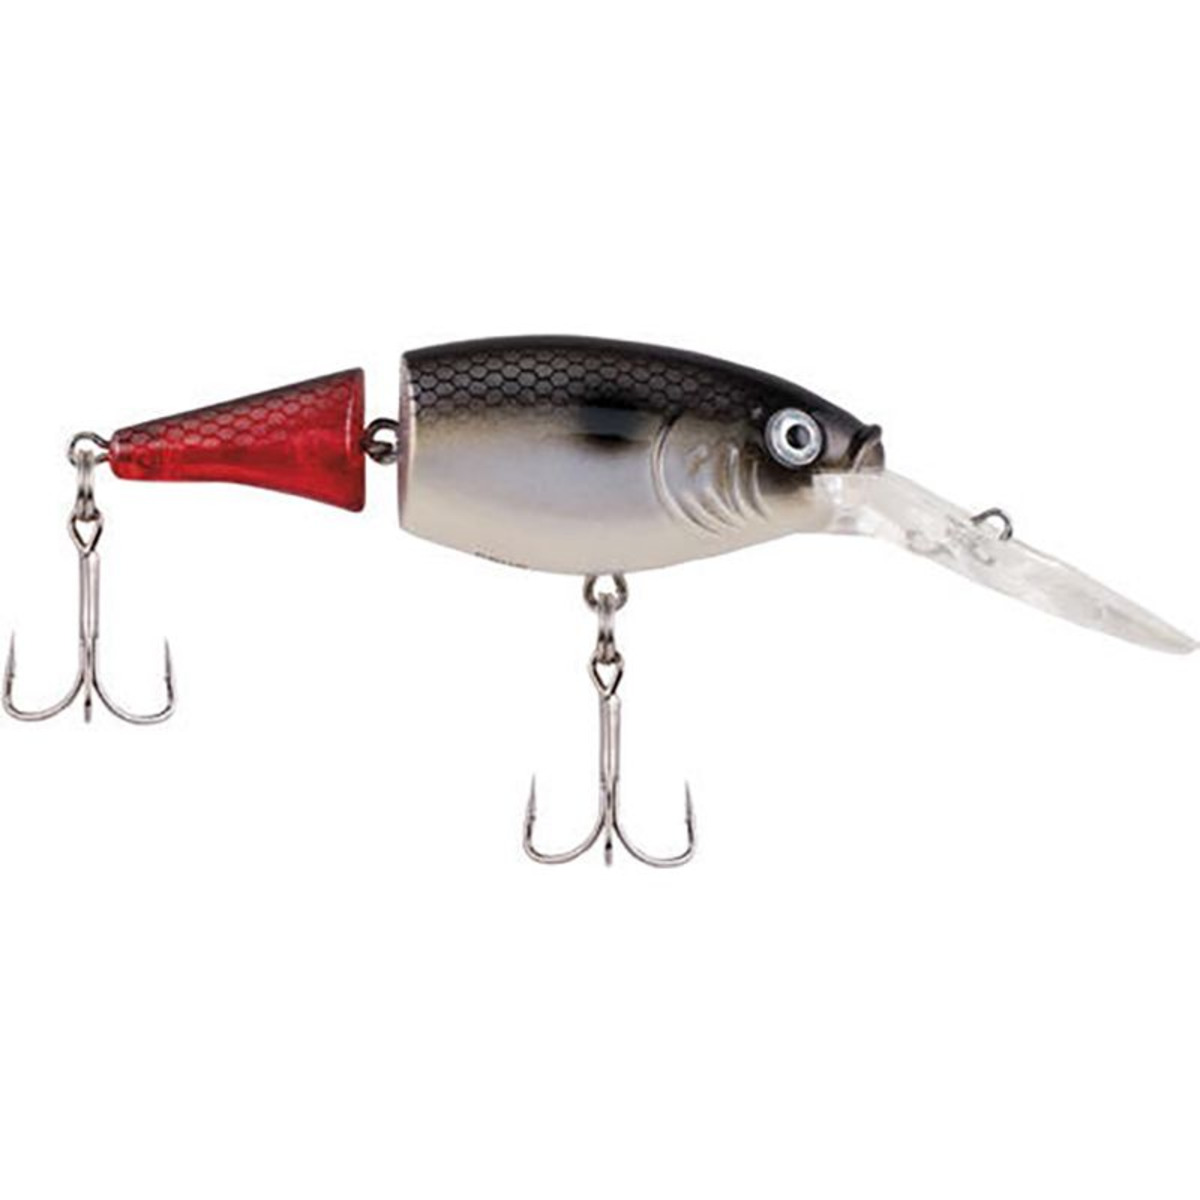 Berkley Flicker Shad Jointed Fire Tail - 7 cm - 8.5 g - Red Tail